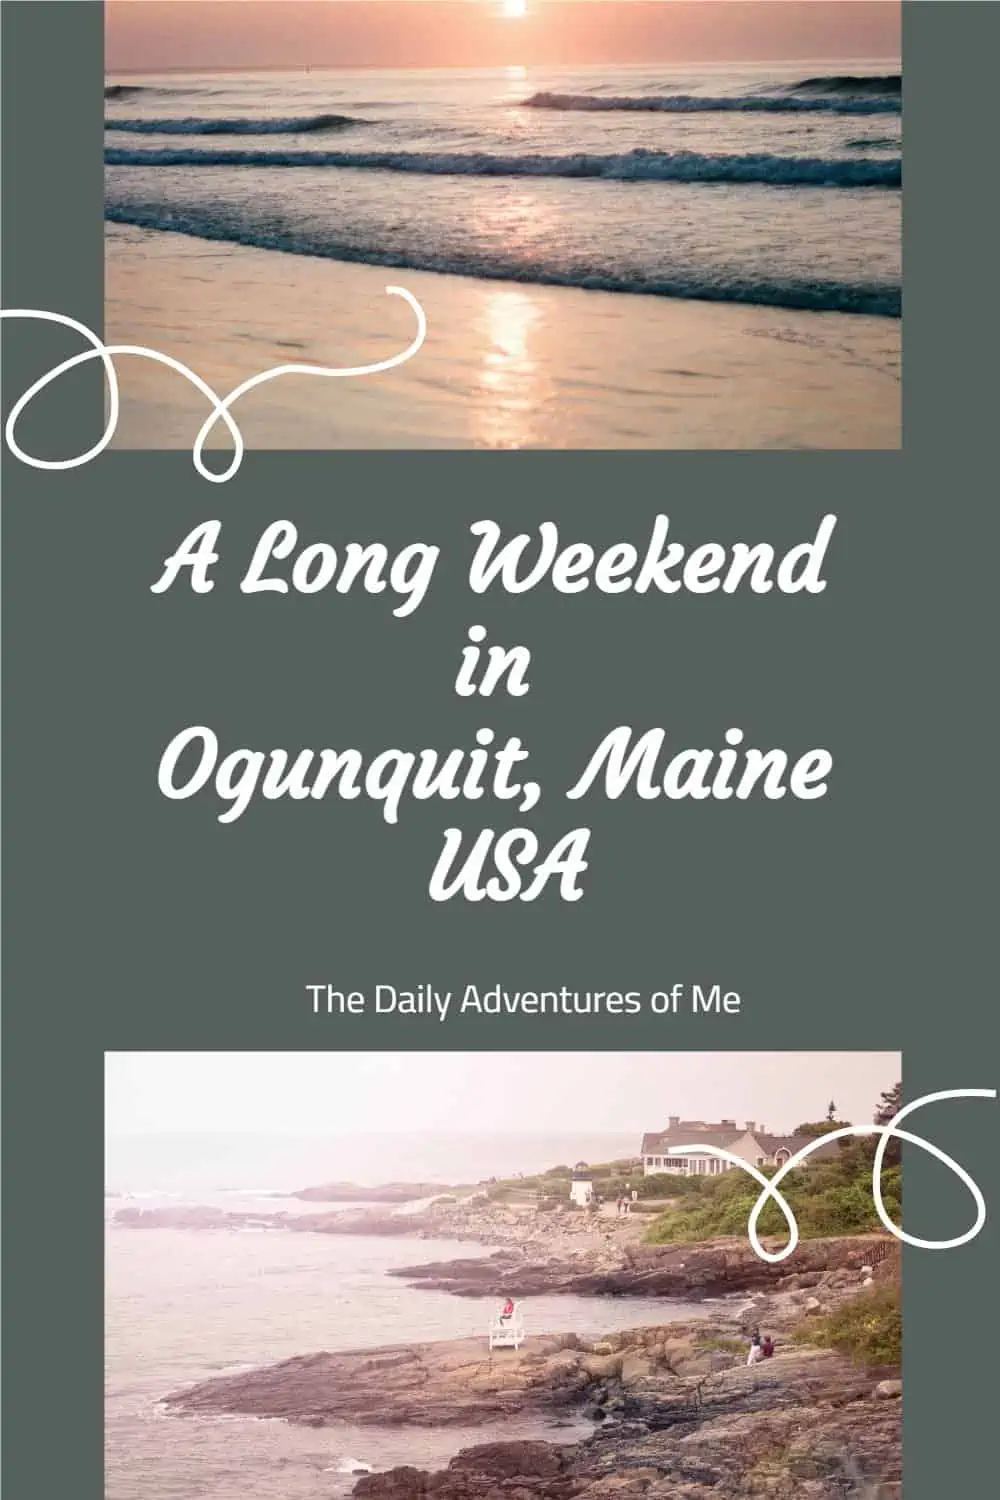 Are you looking for a getaway from Boston? Consider a weekend in the laidback town of Ogunquit, Maine. #Bostonroadtrip @VisitMaine #bostongetaway